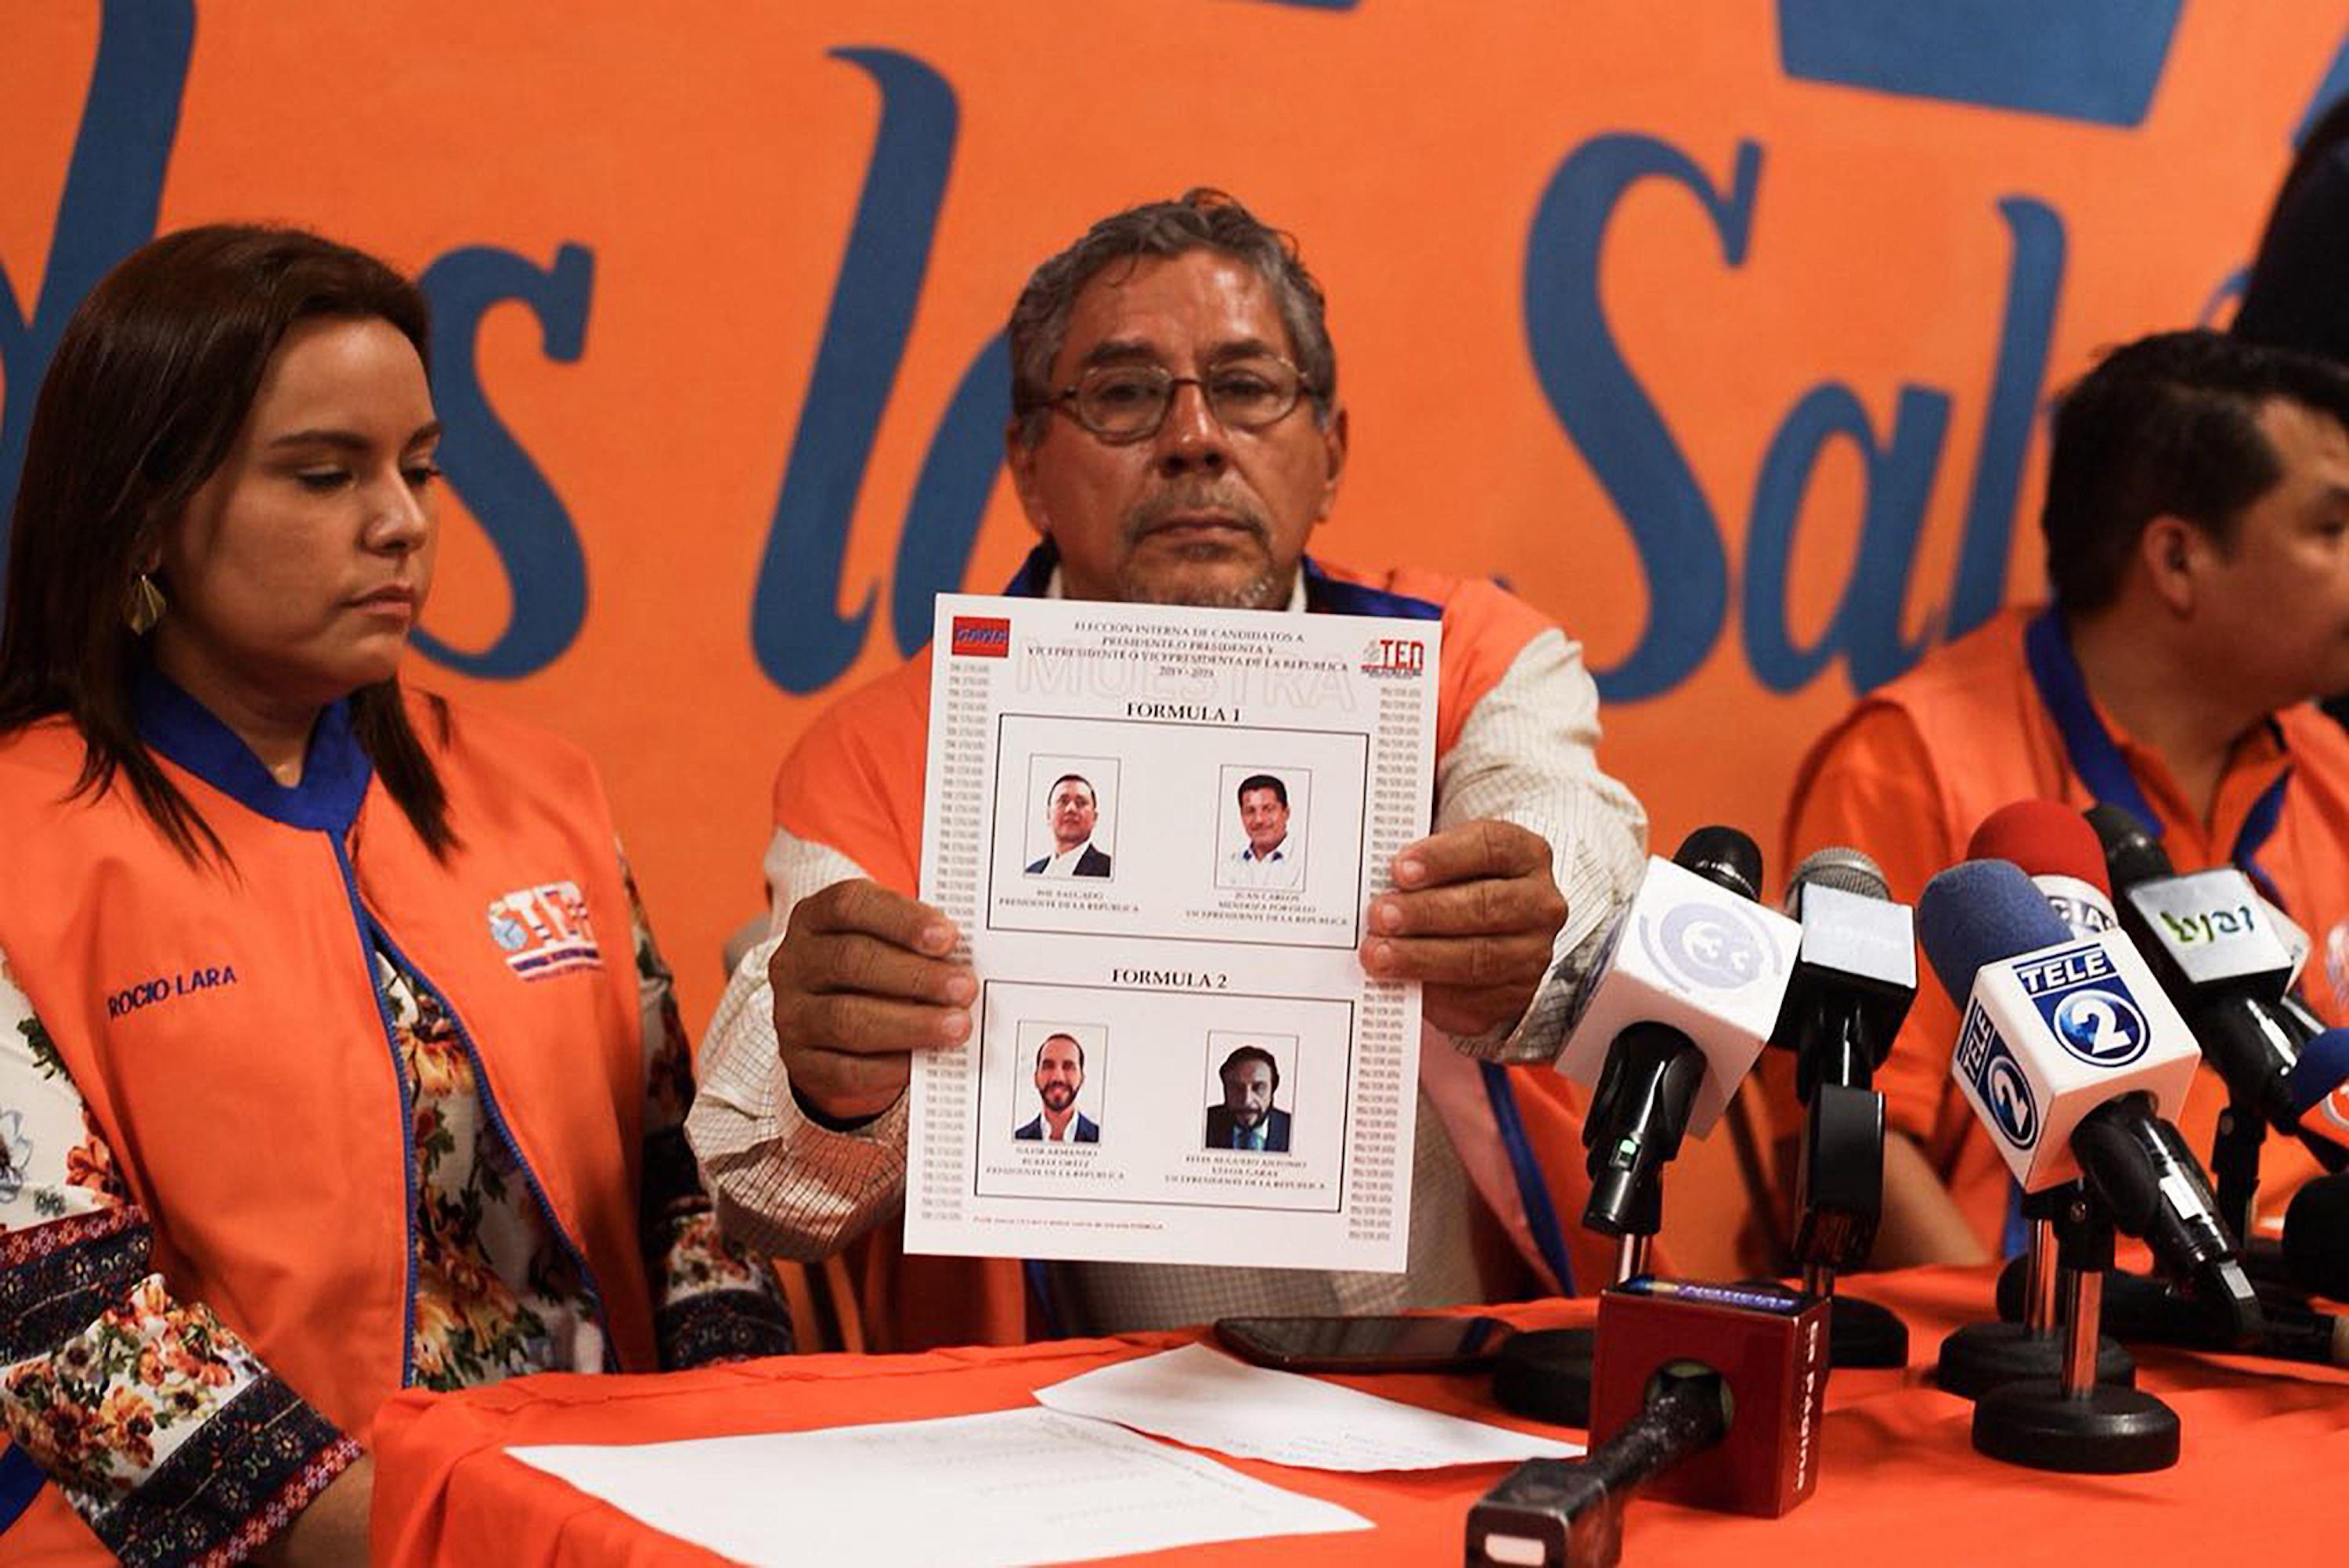 Members of GANA show off 2019 ballot including Nayib Bukele and Félix Ulloa as their party's candidates for president and vice president. Photo: Fred Ramos/El Faro